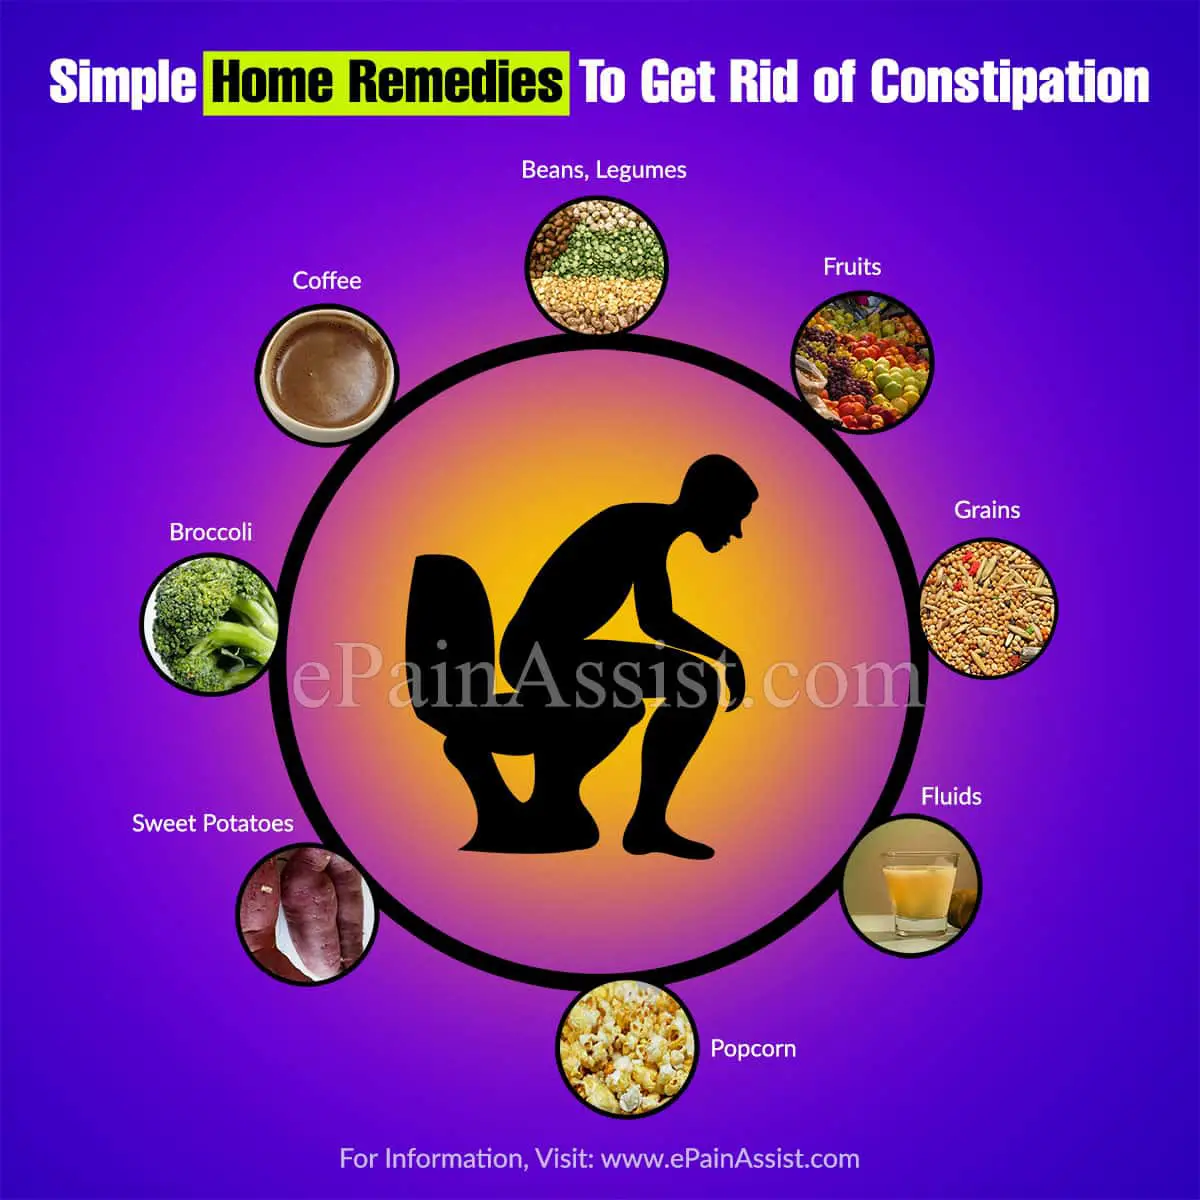 How To Get Rid Of Constipation Fast At Home